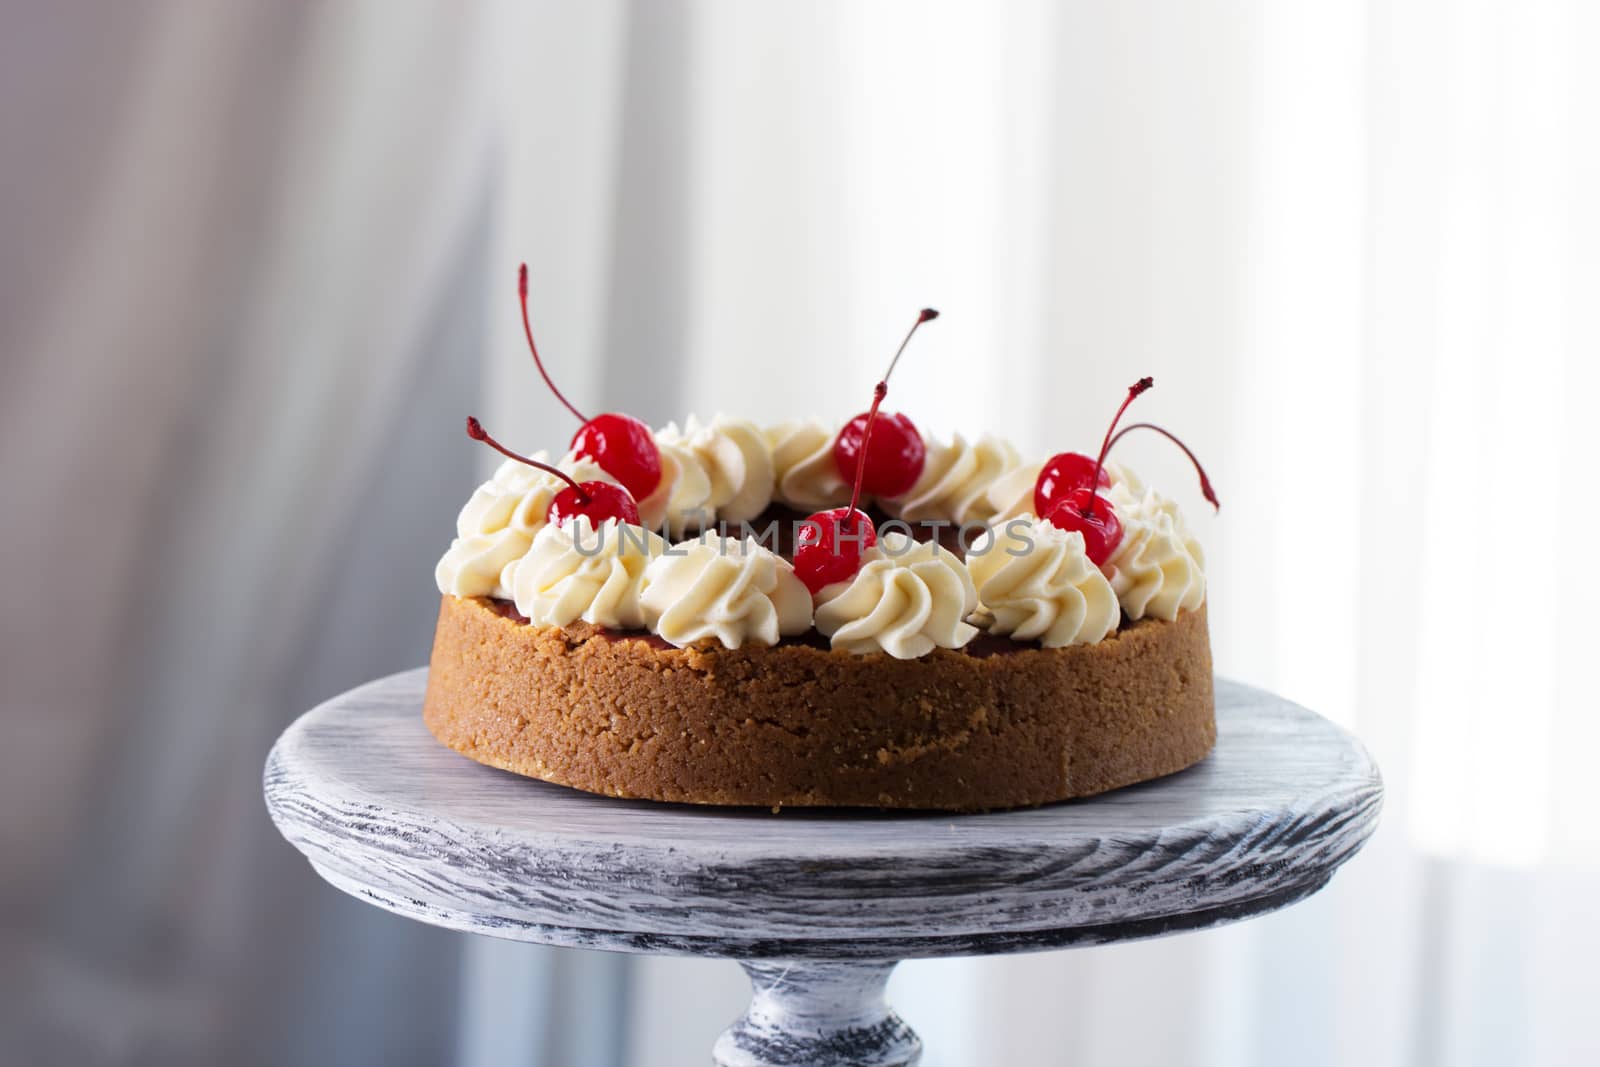 Cheesecake decorated with cherry sauce with berries on a wooden cake stand